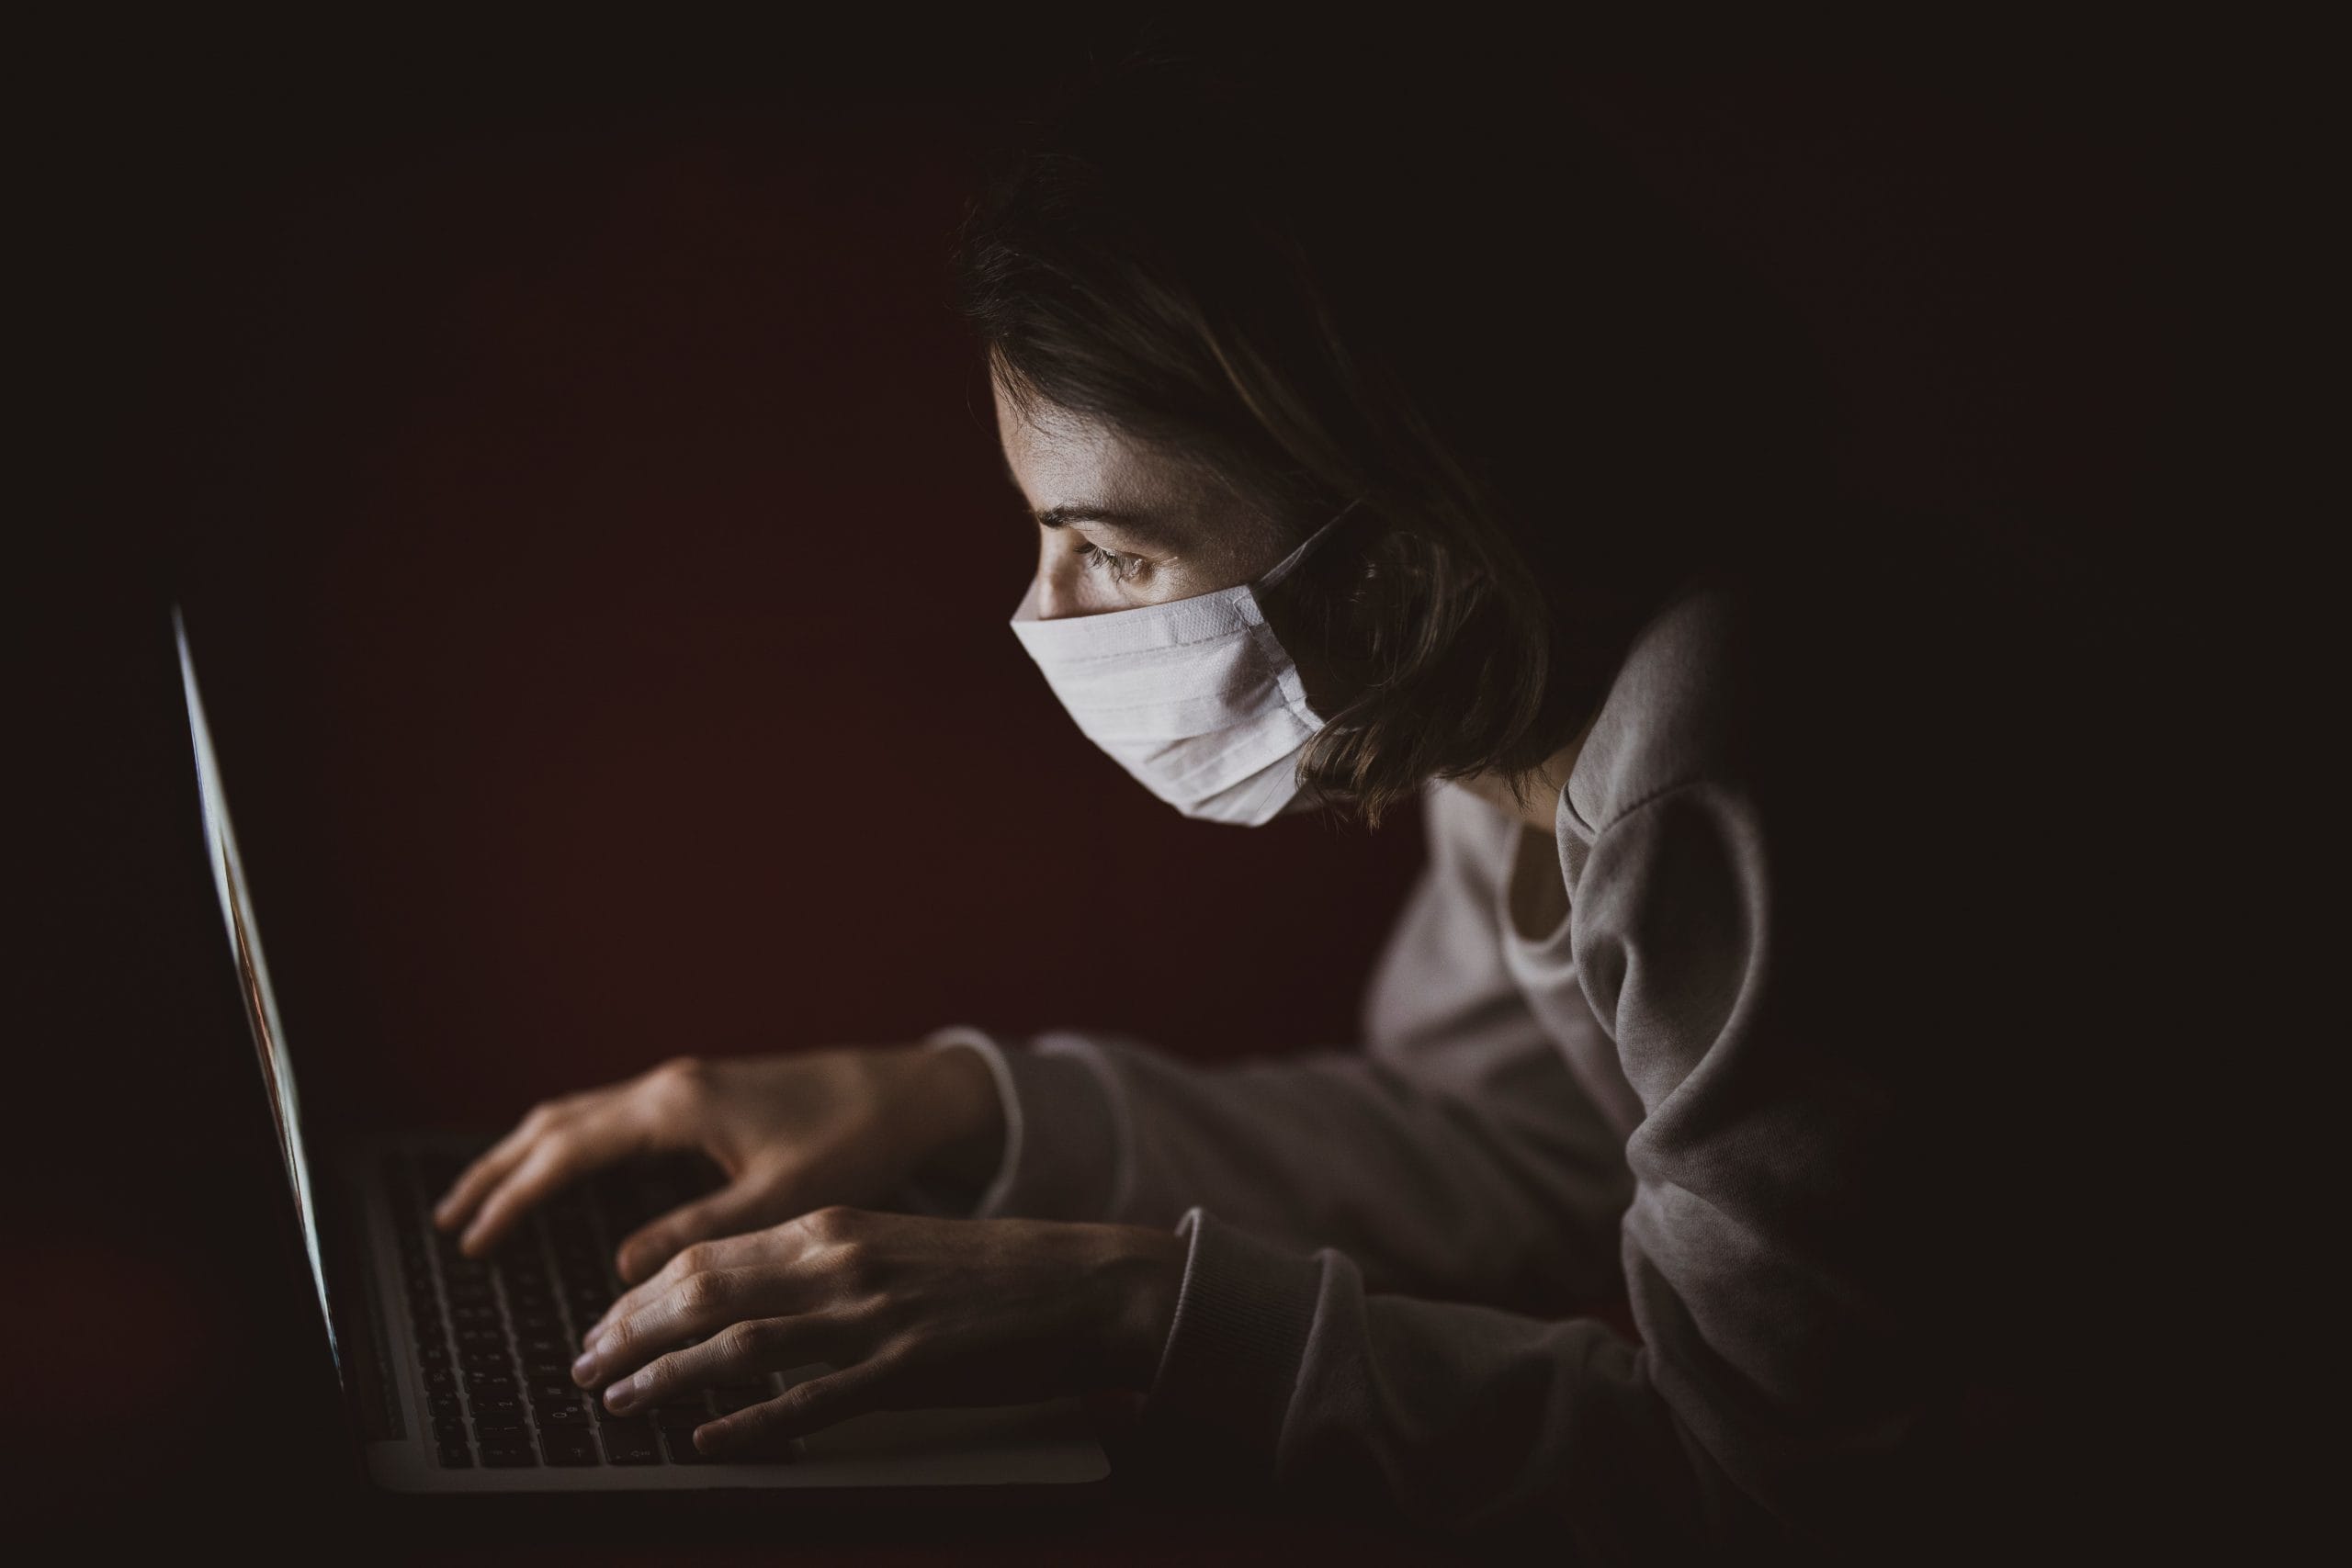 Over 35,500 coronavirus-related websites reported as scam